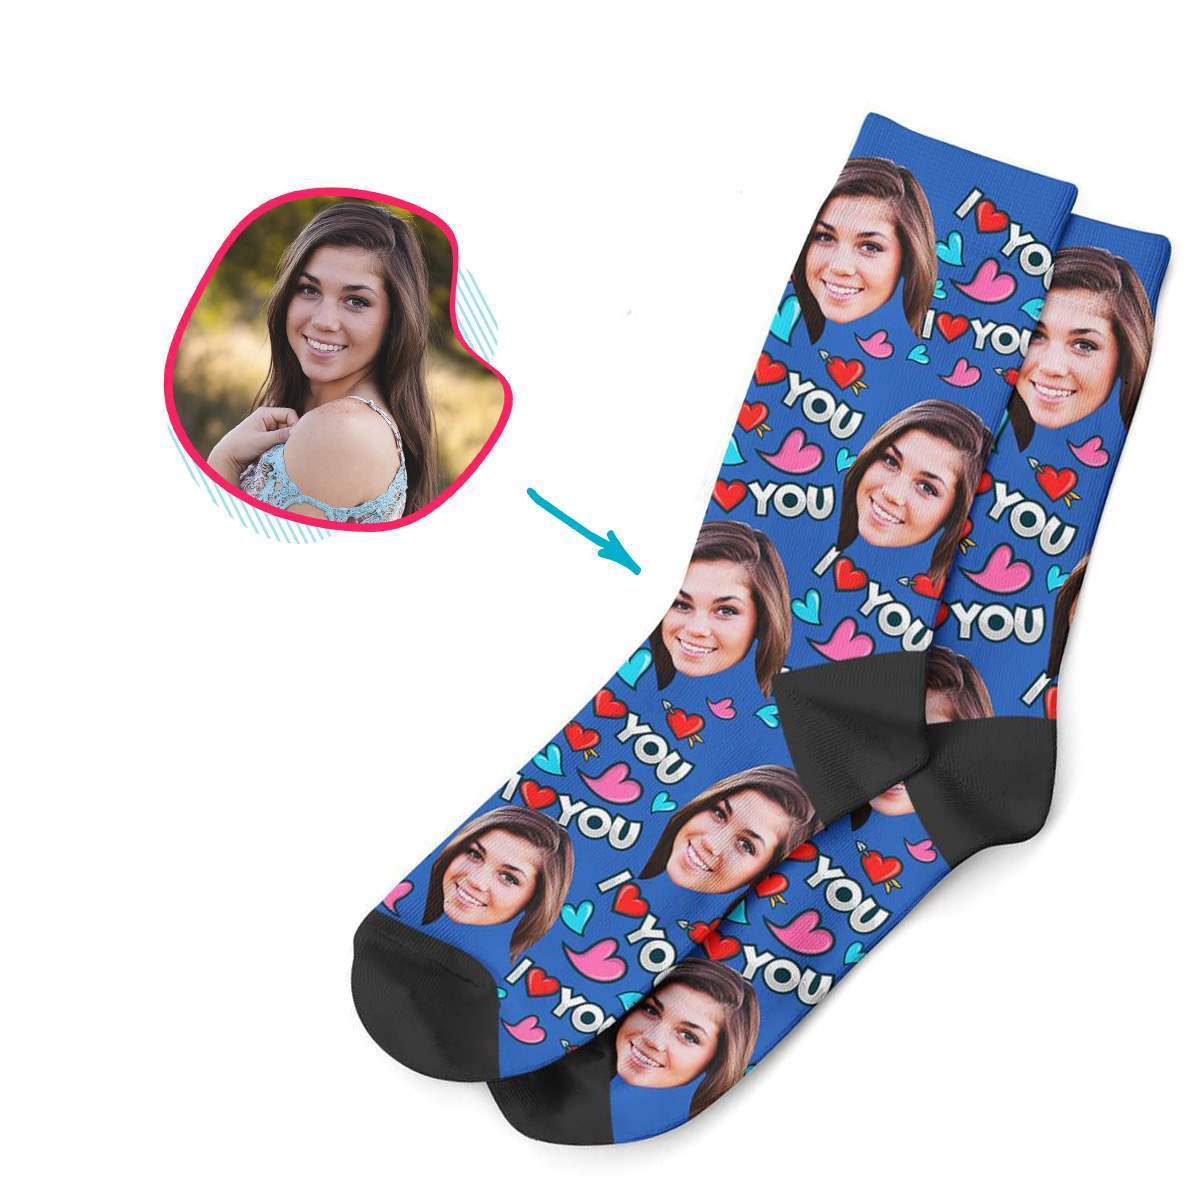 darkblue Love You socks personalized with photo of face printed on them